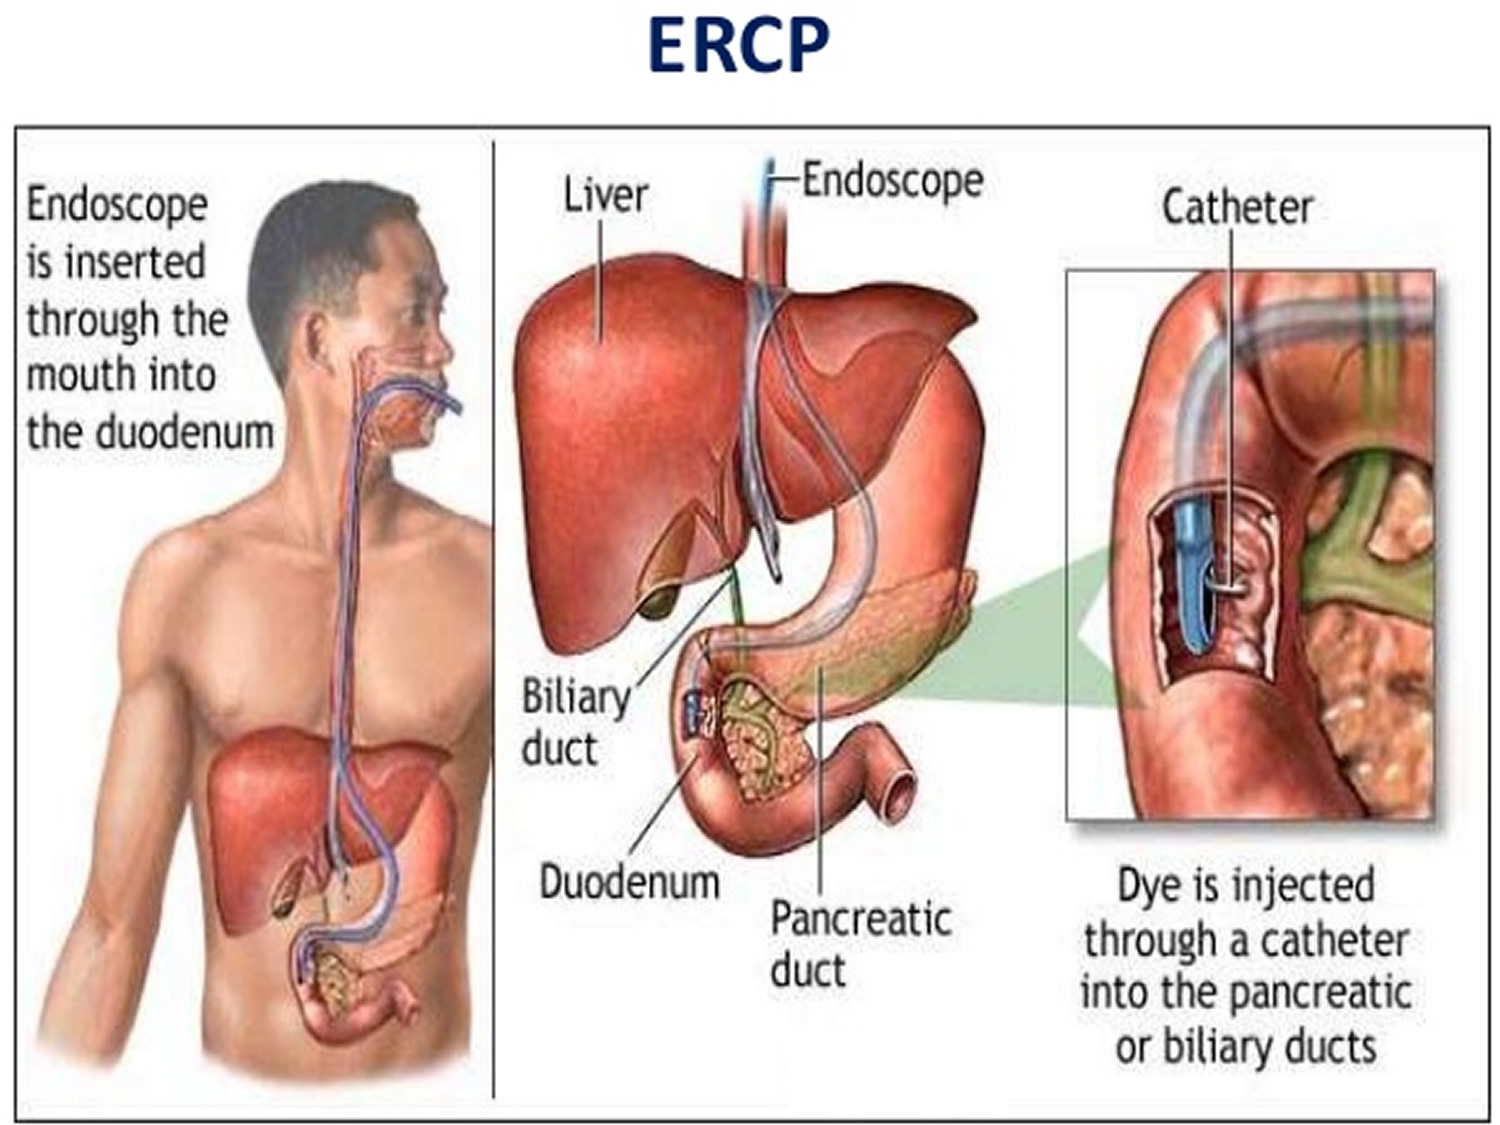 ERCP Procedure - Indications, Recovery, Complications